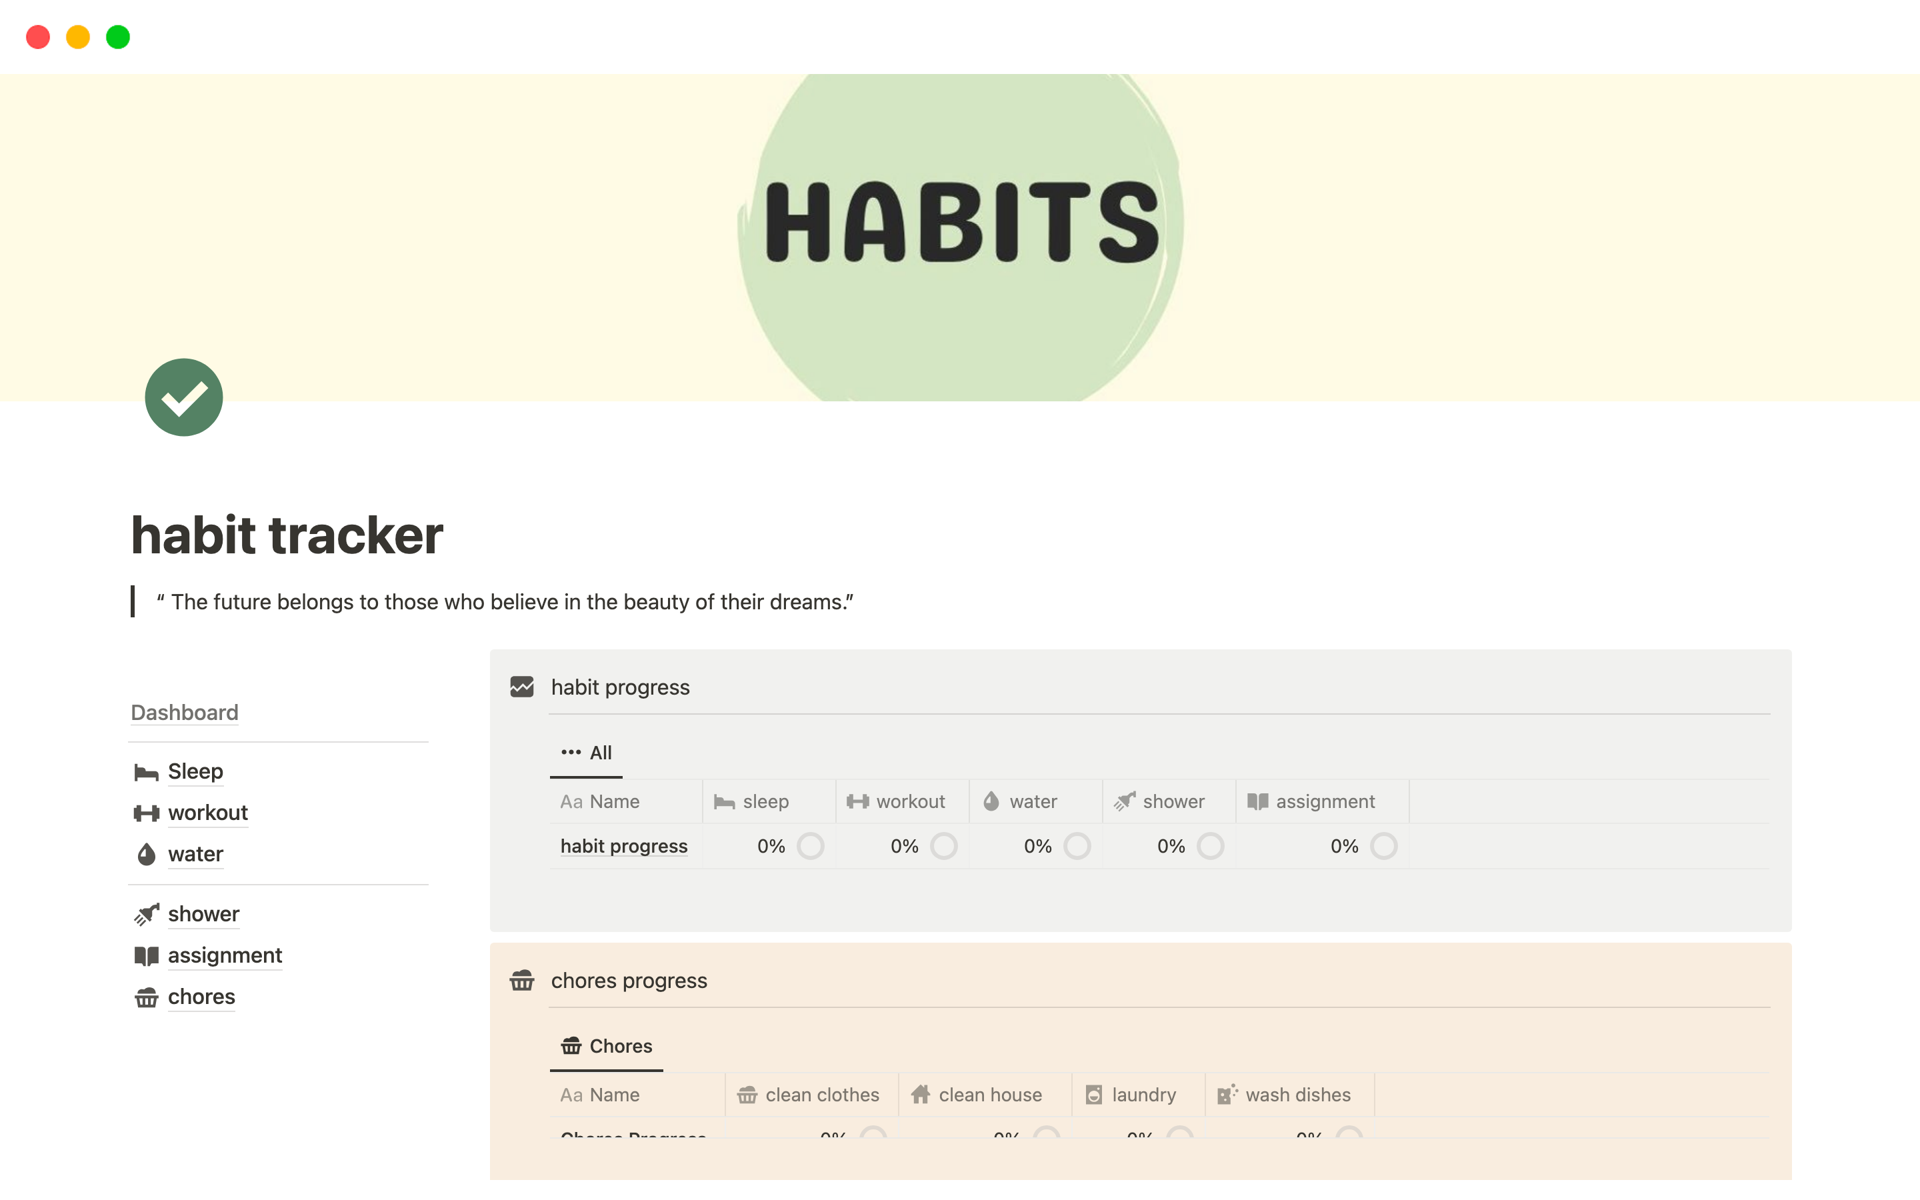 This document is a habit tracker template that includes various habits such as sleep, workout, and water intake. The template is designed to help users track their daily habits and stay accountable for their goals.